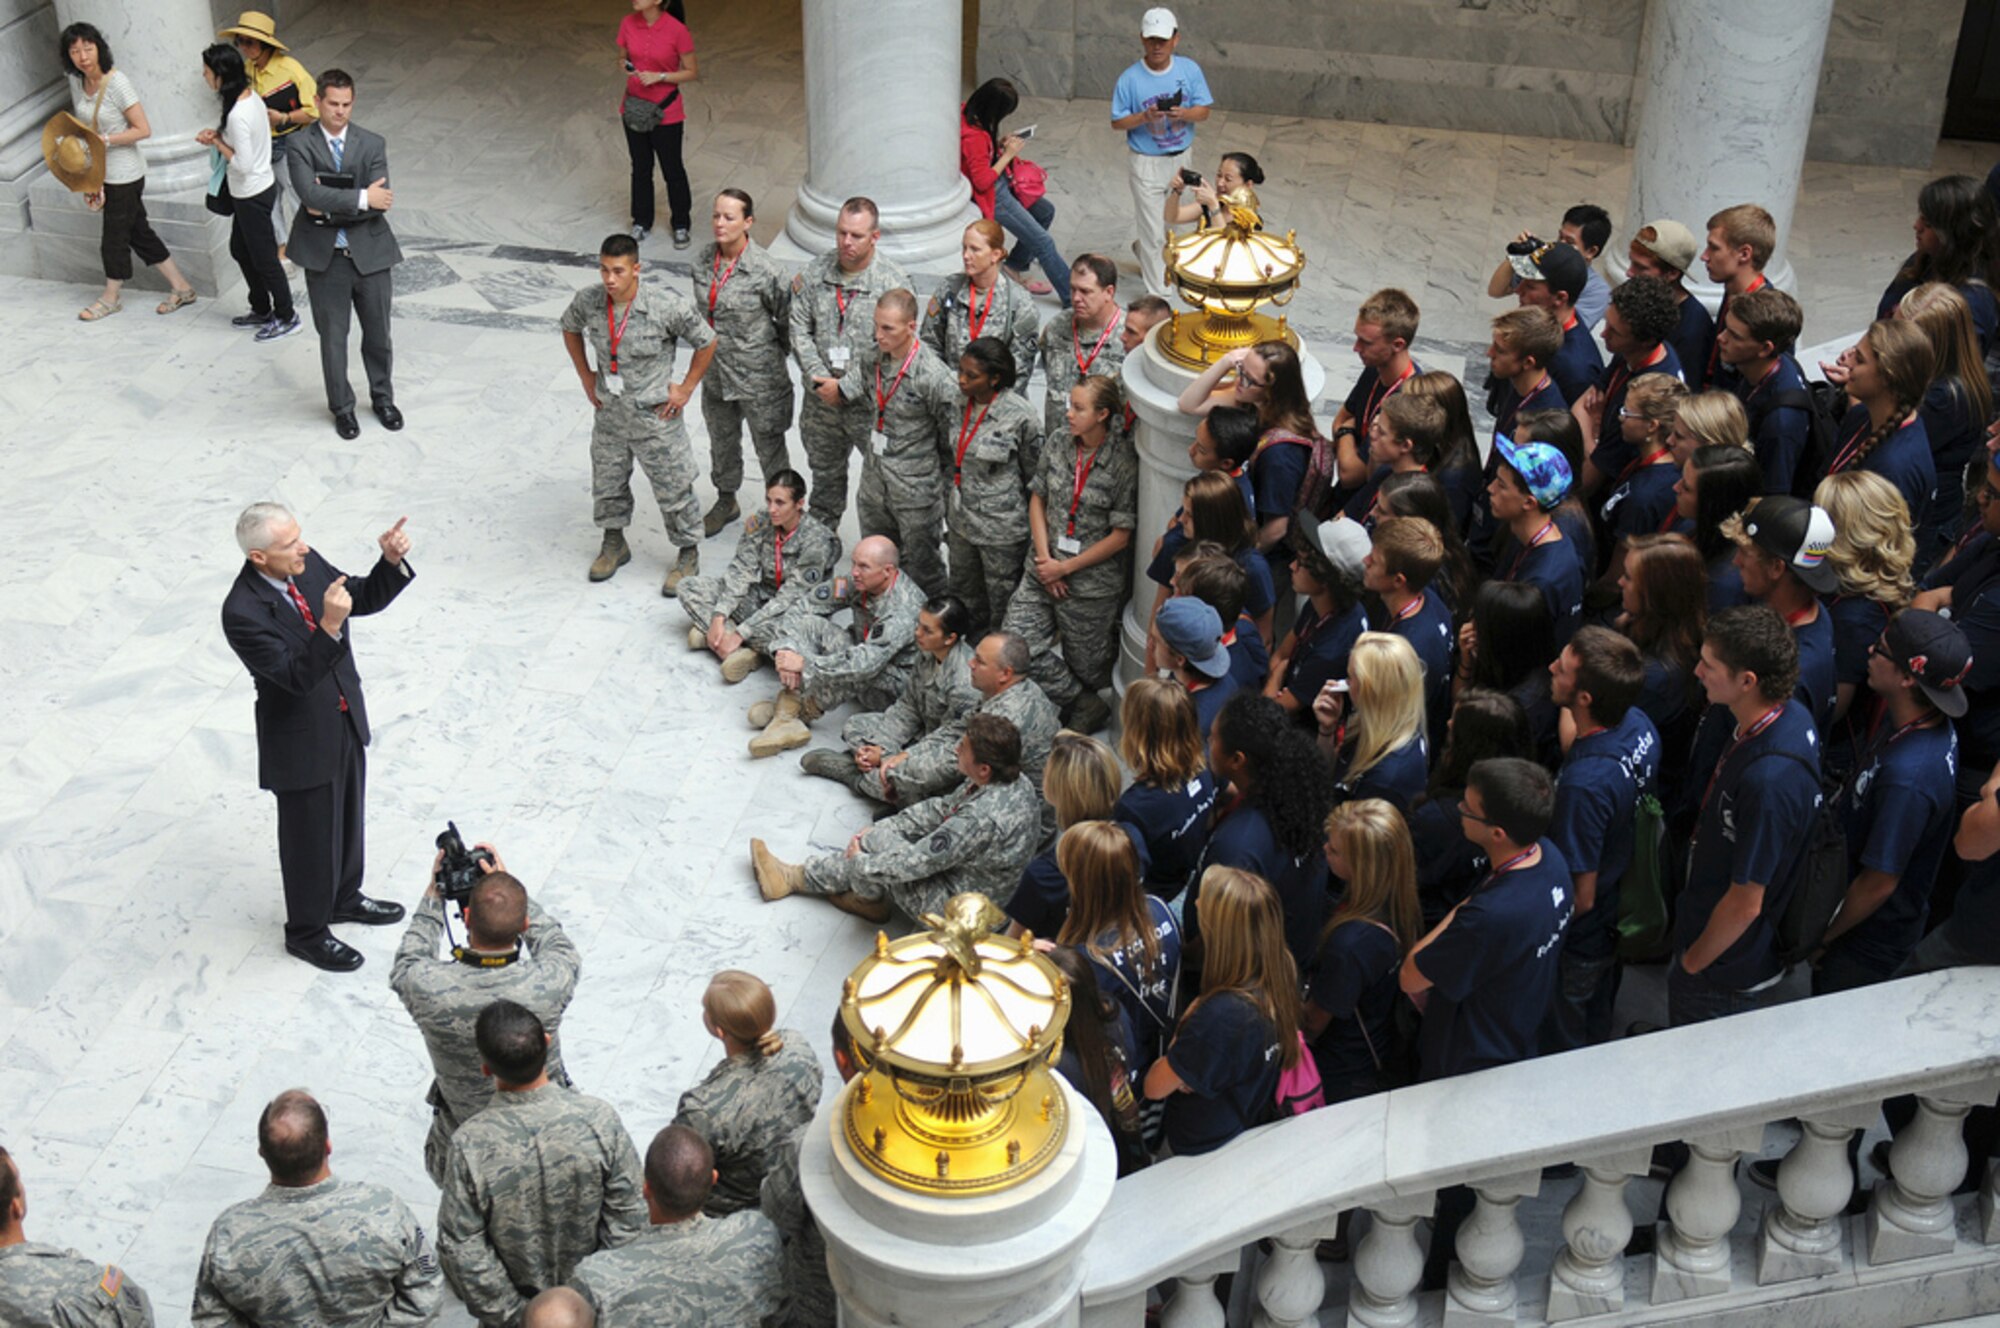 Utah's lieutenant governor, Greg Bell, addresses Freedom Academy delegates in the Utah State Capitol rotunda, July 30. Freedom Academy is an annual leadership conference sponsored and hosted by the Utah National Guard since 1961 that brings in student body leaders from high schools across Utah and neighboring states to teach them about all aspects of leadership. (U.S. Army National Guard photo by Sgt. Scott Wolfe, 128th Mobile Public Affairs Detachment)